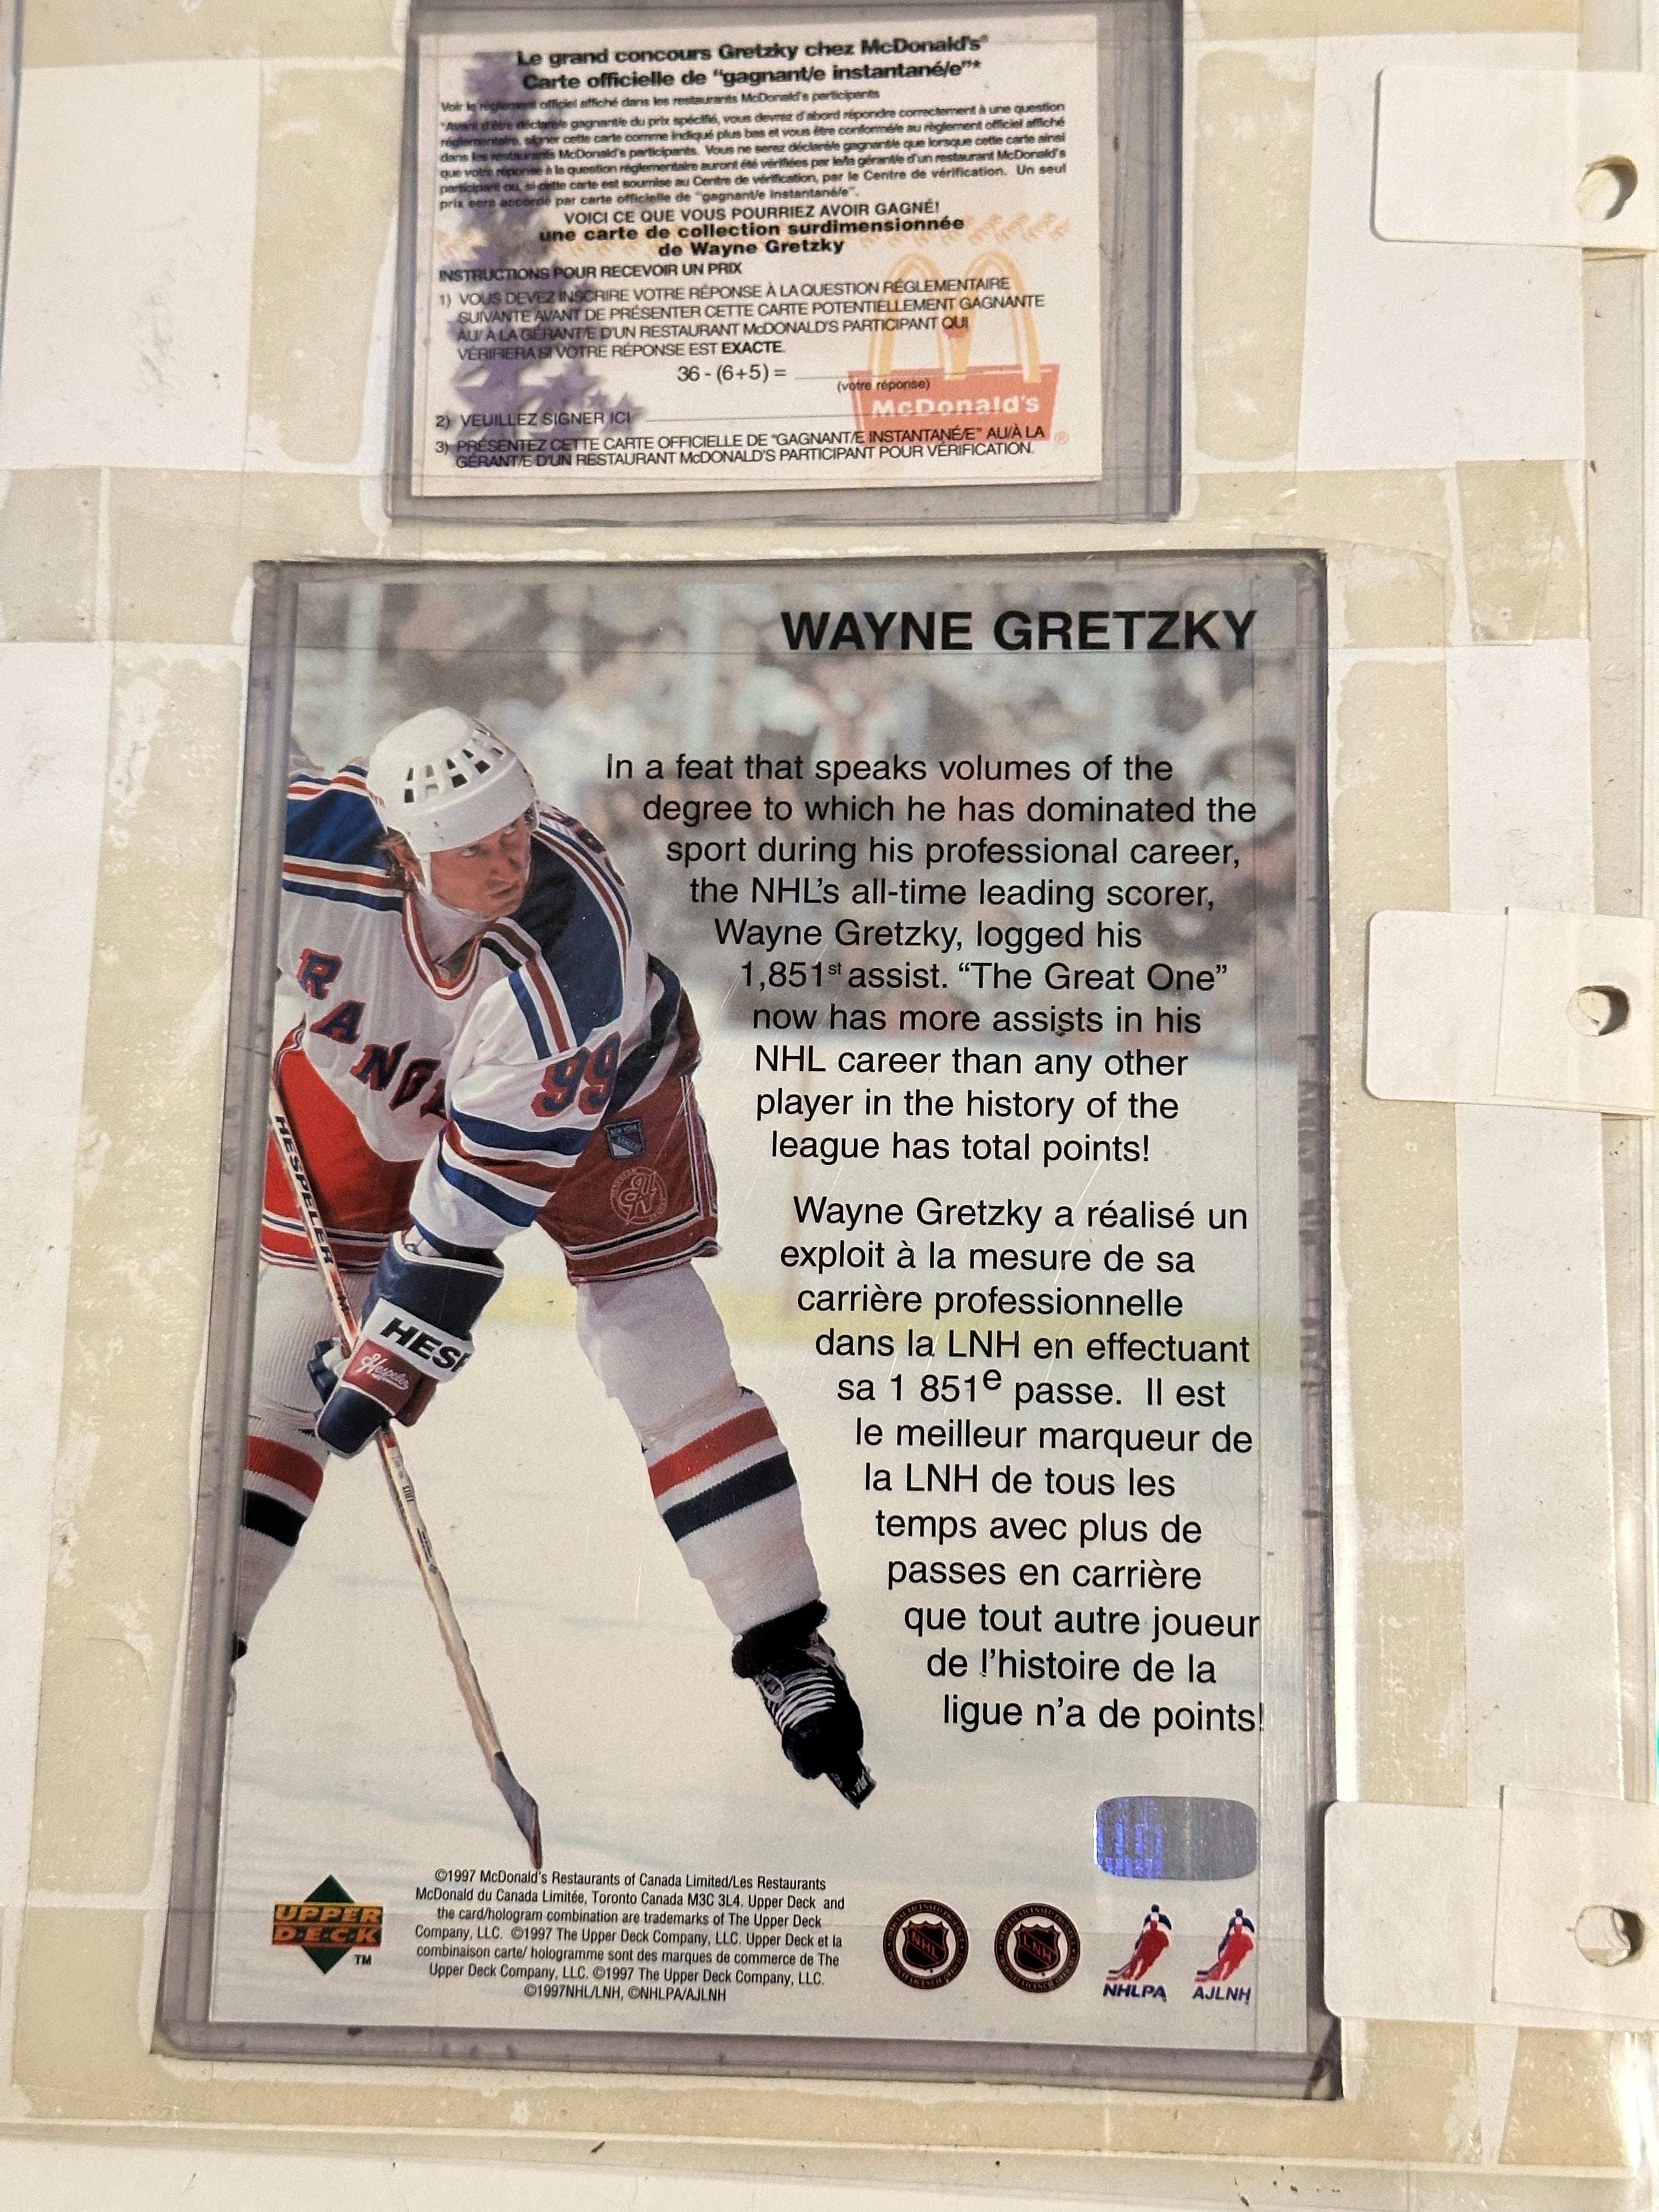 Wayne Gretzky large Mcdonalds instant winner hockey card with redemption card 1997